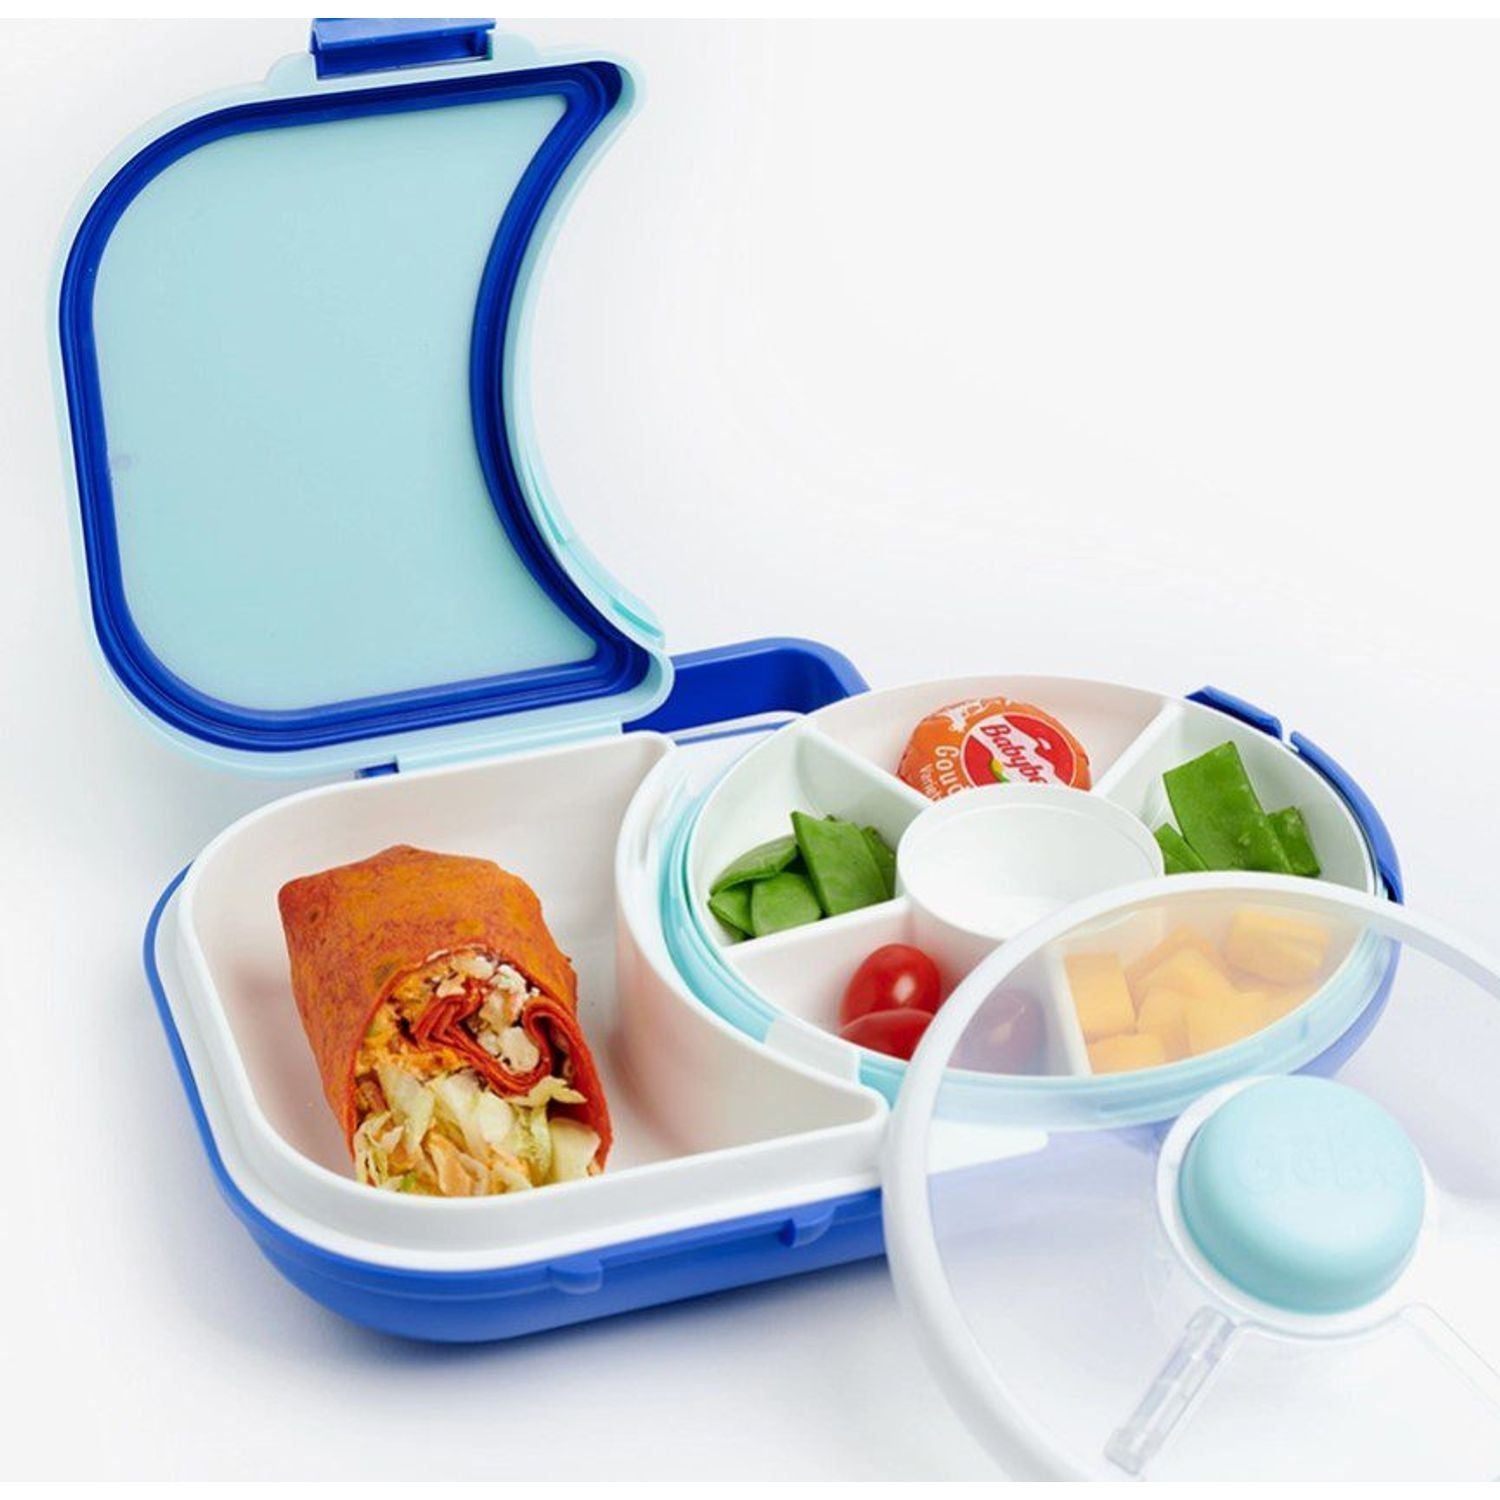  GoBe Kids Lunchbox with Detachable Snack Spinner